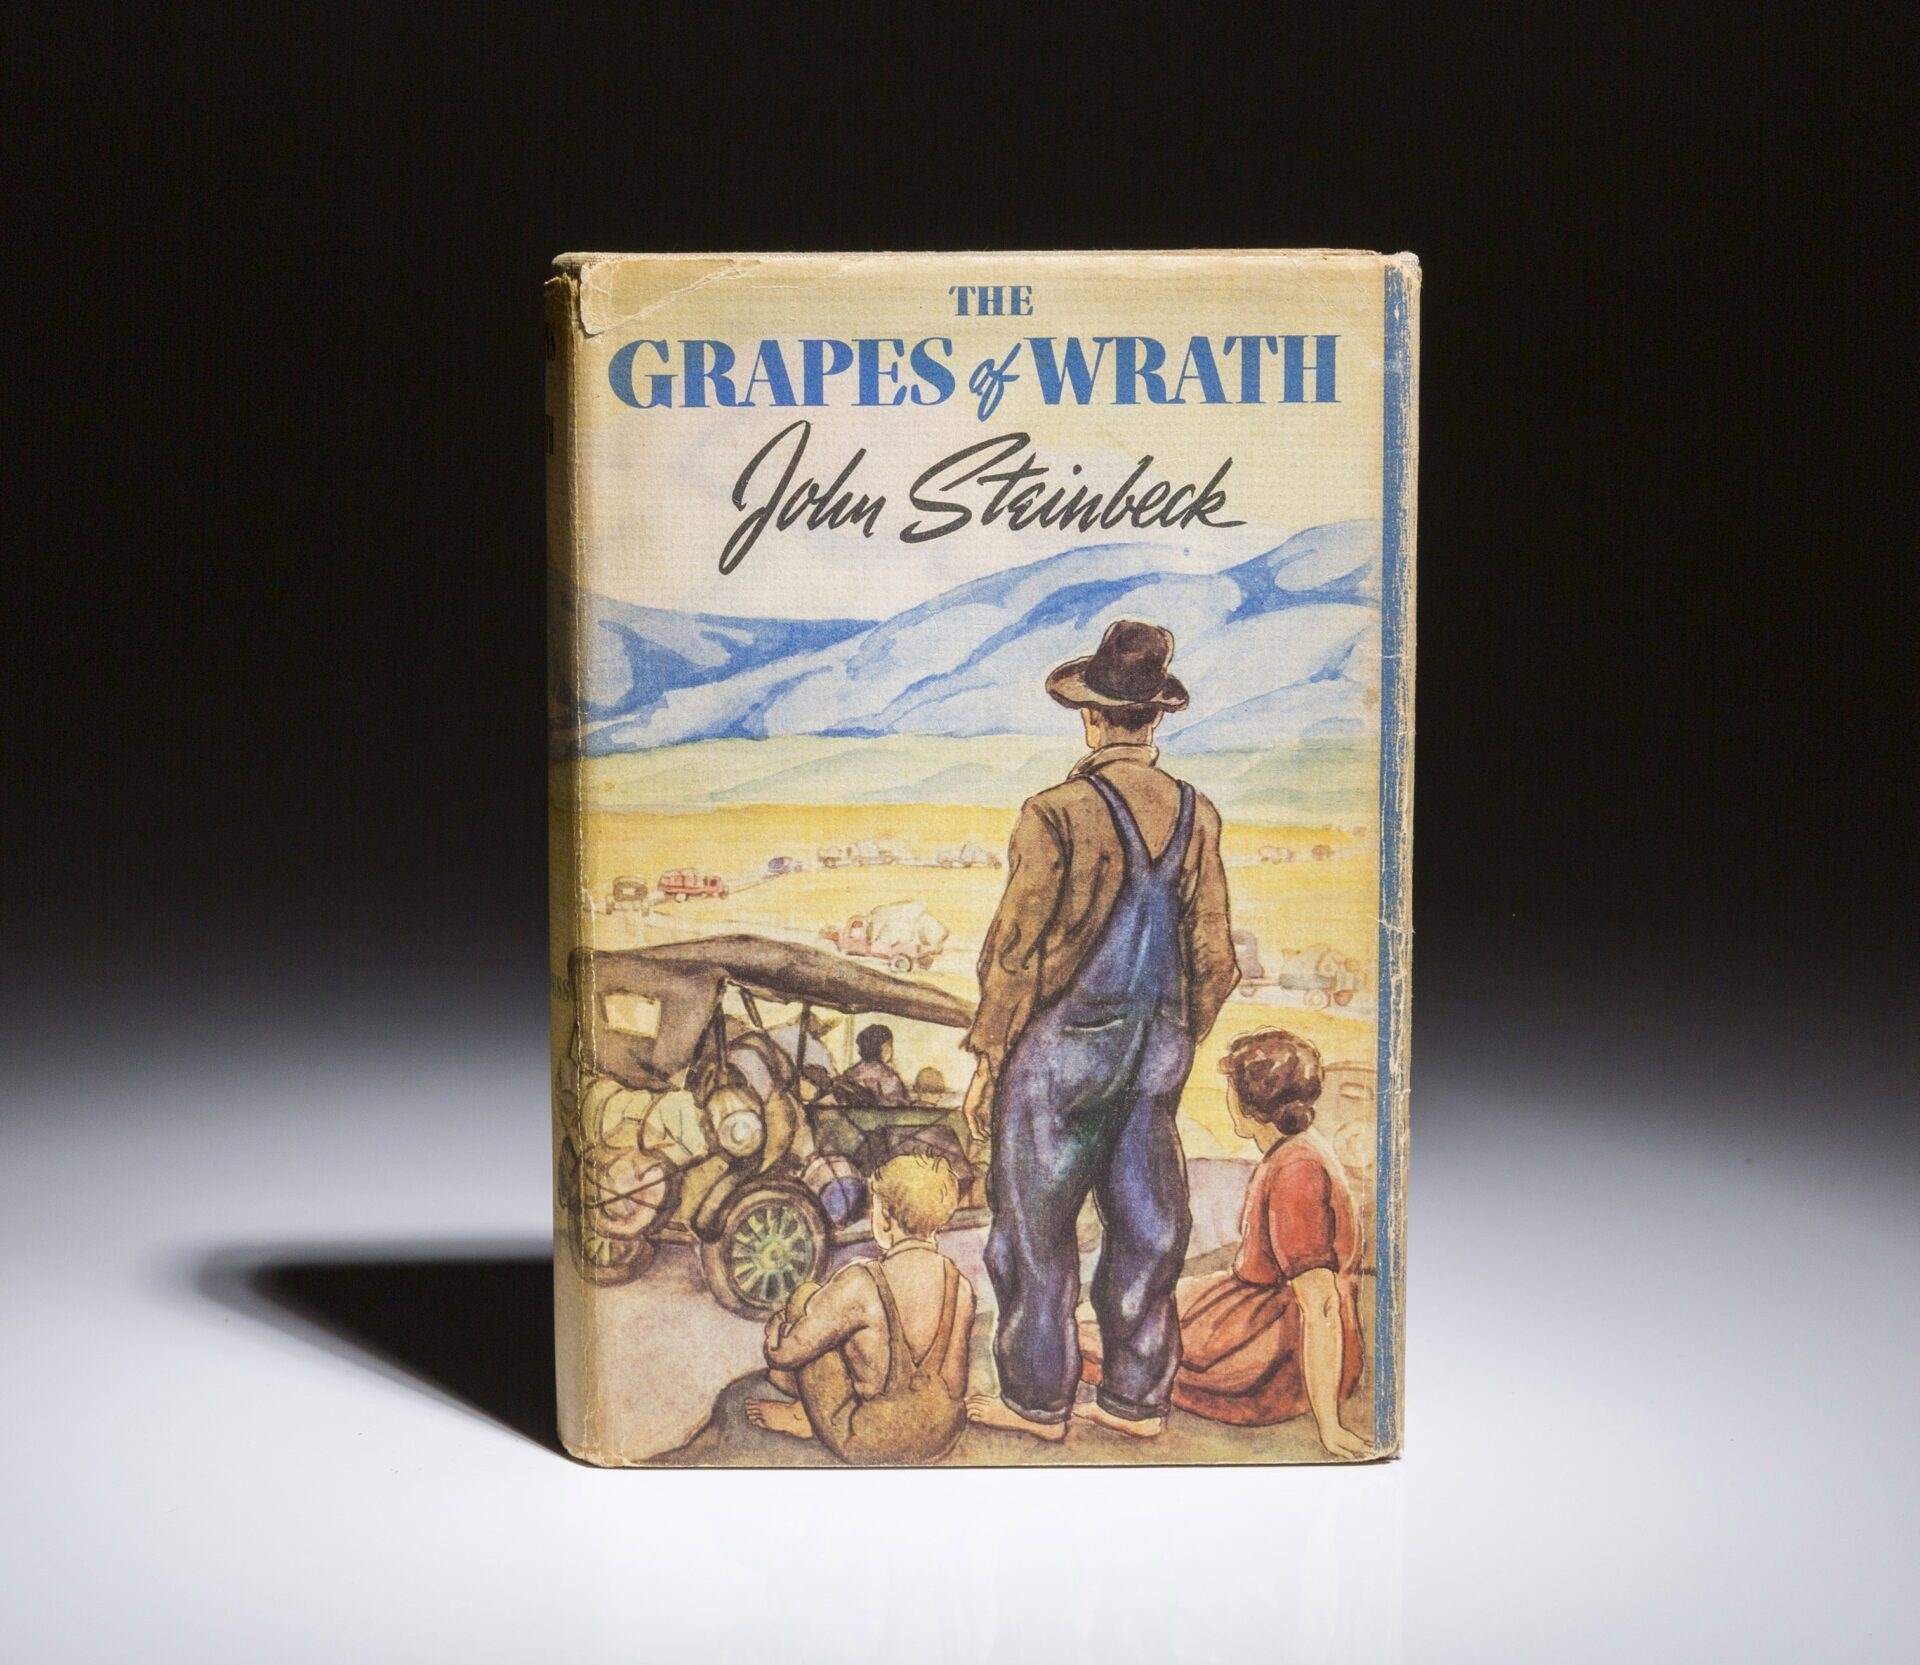 12-enigmatic-facts-about-the-grapes-of-wrath-john-steinbeck